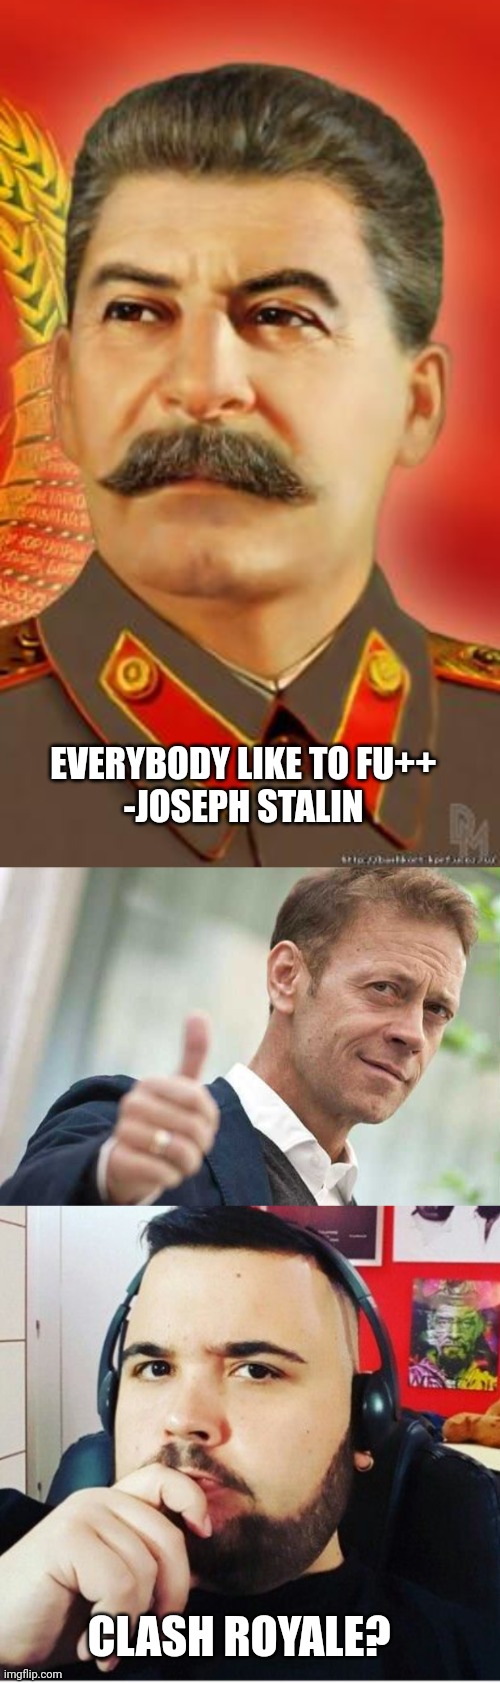 Chad dioporco che siamo mo | EVERYBODY LIKE TO FU++
-JOSEPH STALIN; CLASH ROYALE? | image tagged in stalin,rocco thumb up,cicciogamer89 | made w/ Imgflip meme maker